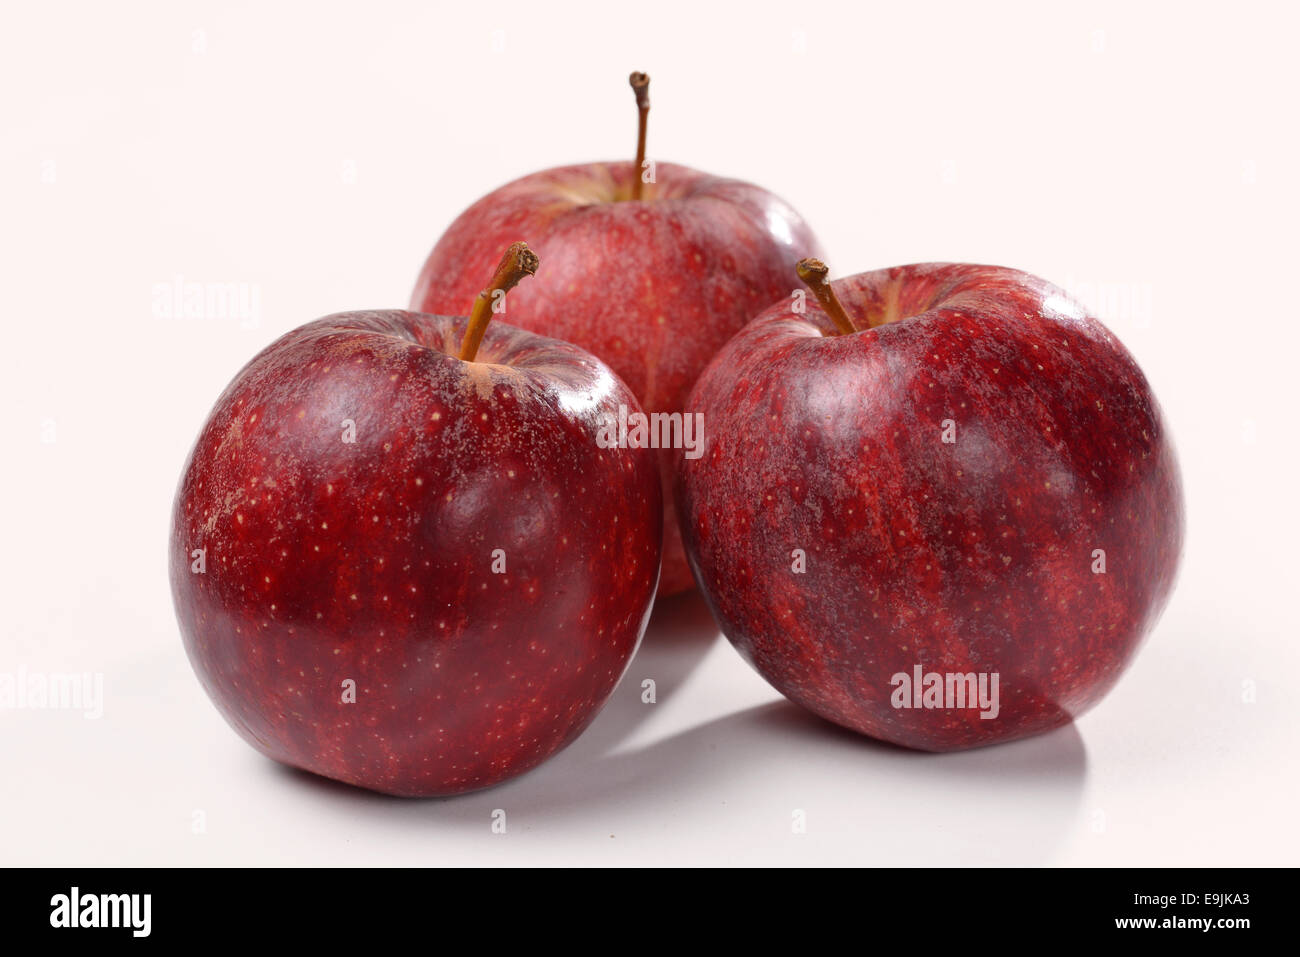 Red apples isolated on a white background Stock Photo